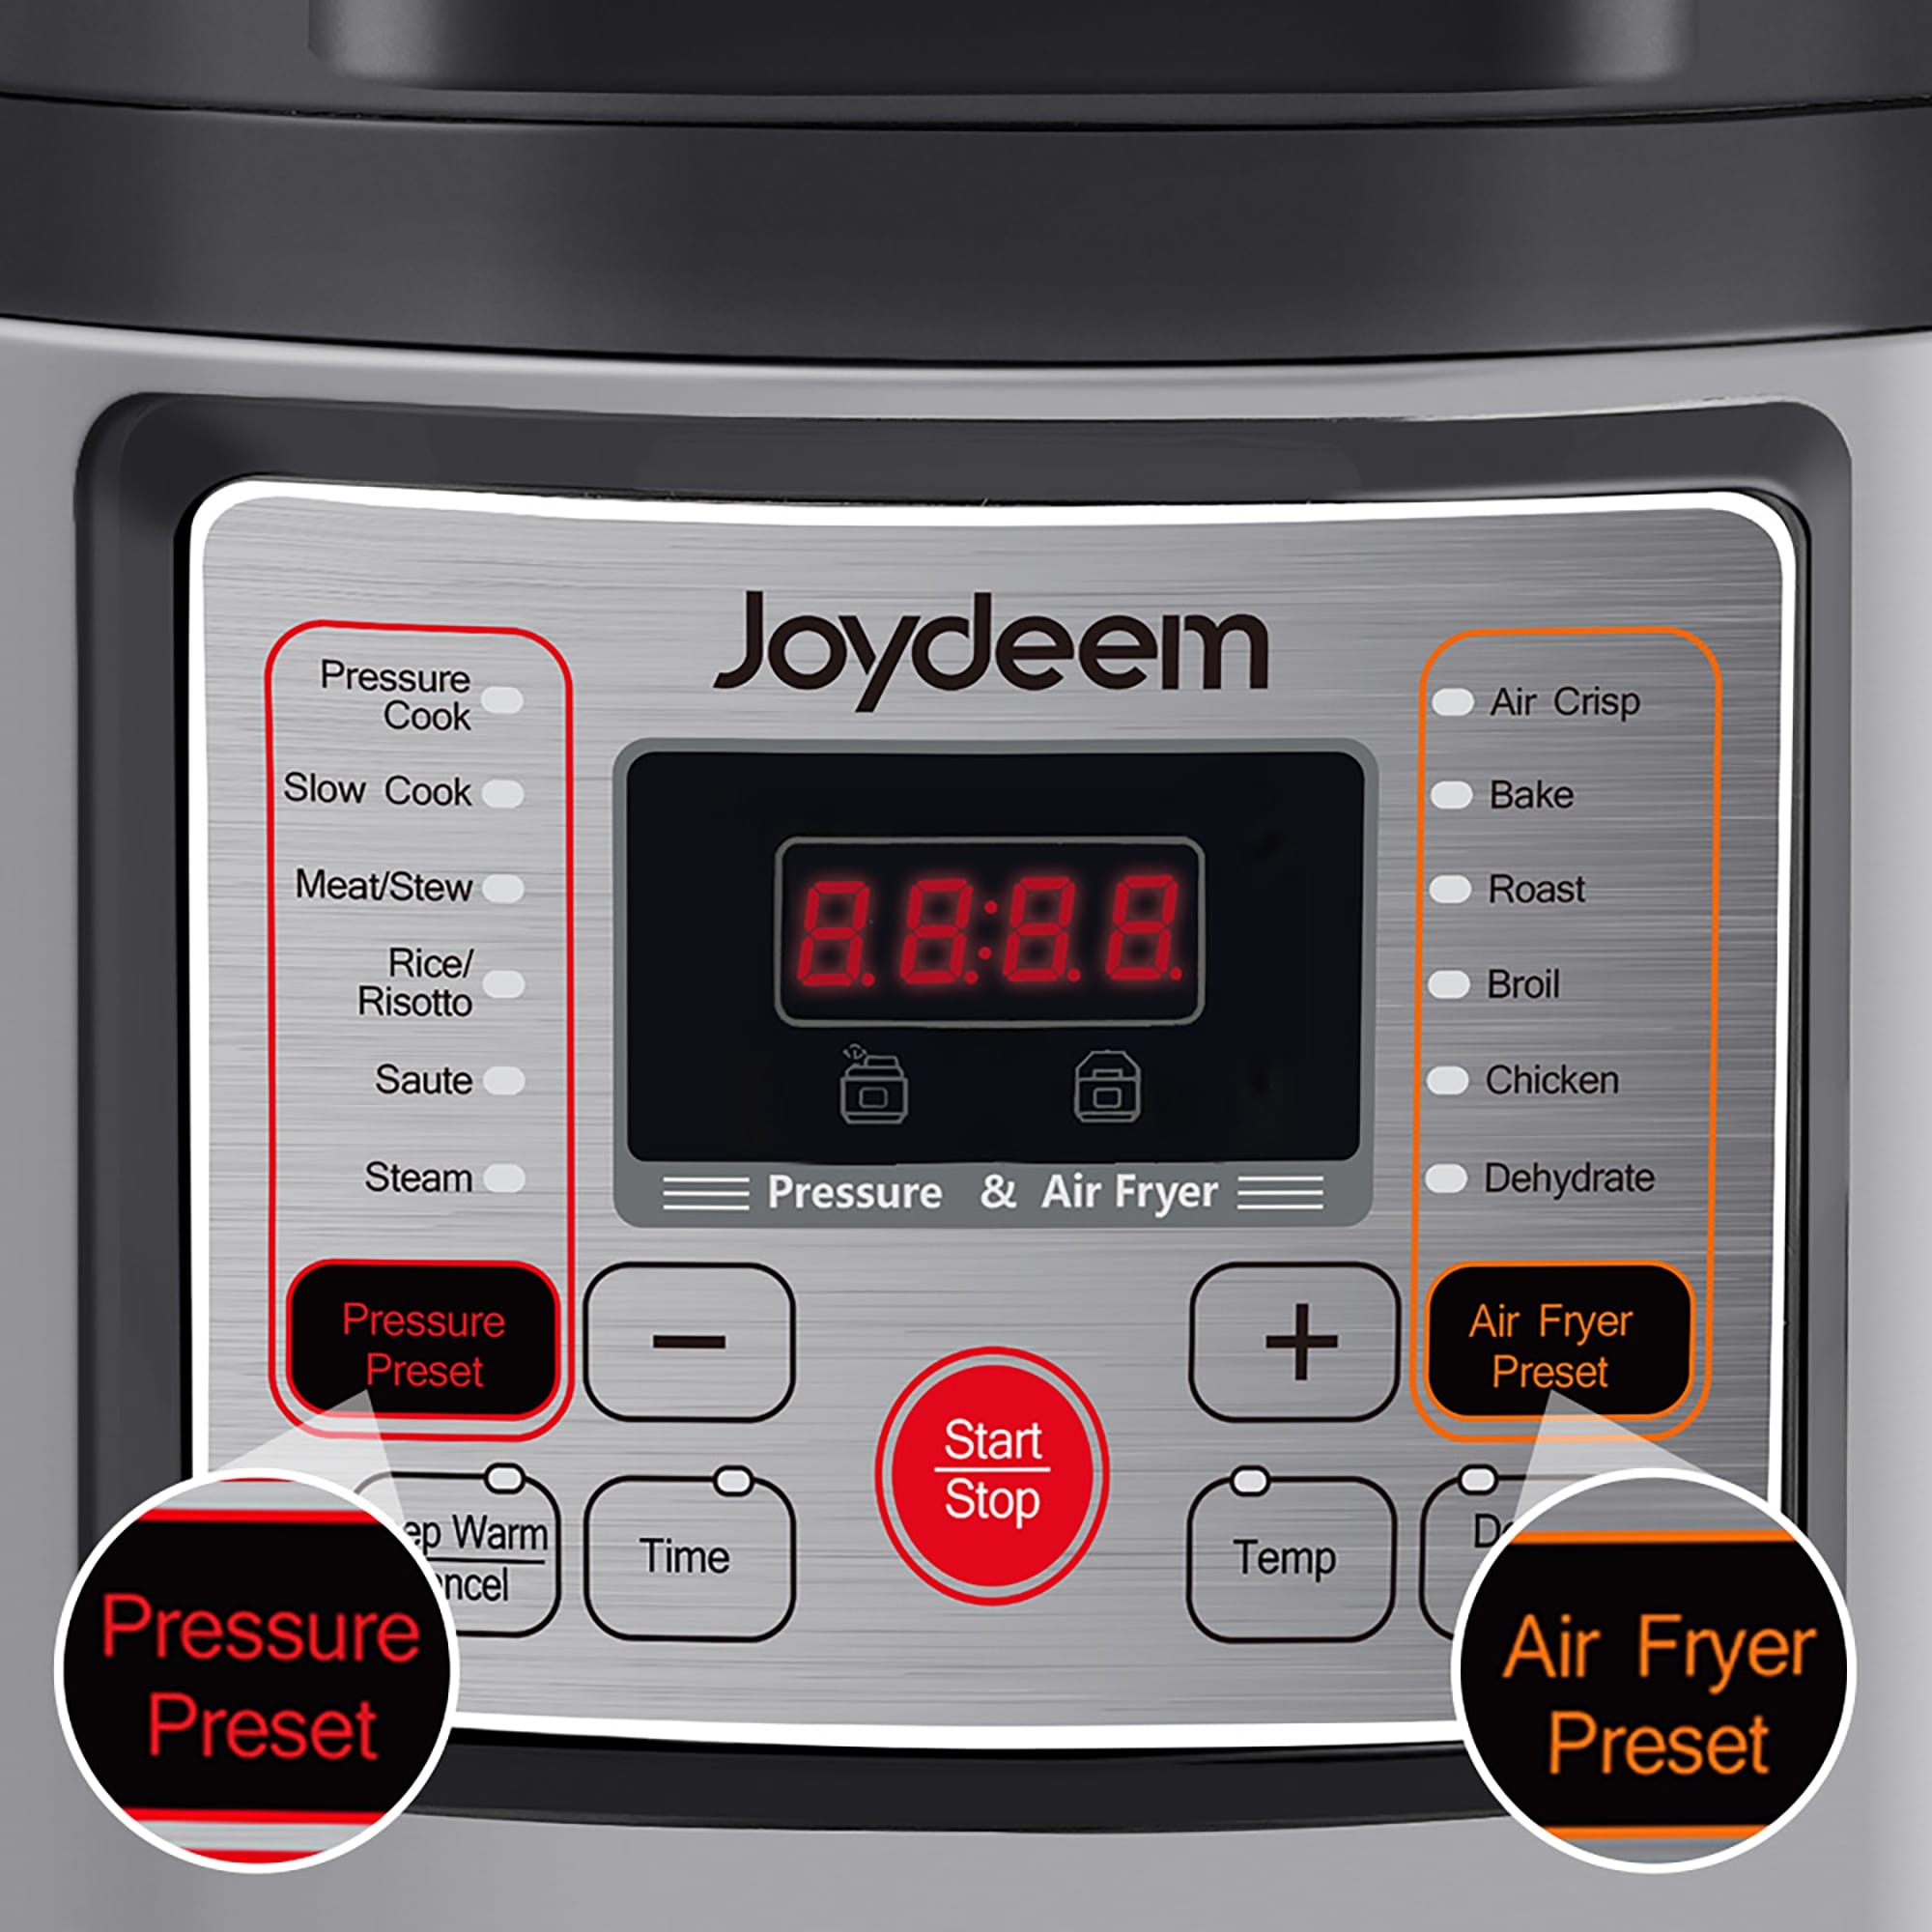 https://ak1.ostkcdn.com/images/products/is/images/direct/e7ae02dffe293693504fea39ba5c74731e706d4e/Joydeem-7Qt.12-in-1-Pressure-Cooker-and-Air-Fryer.jpg